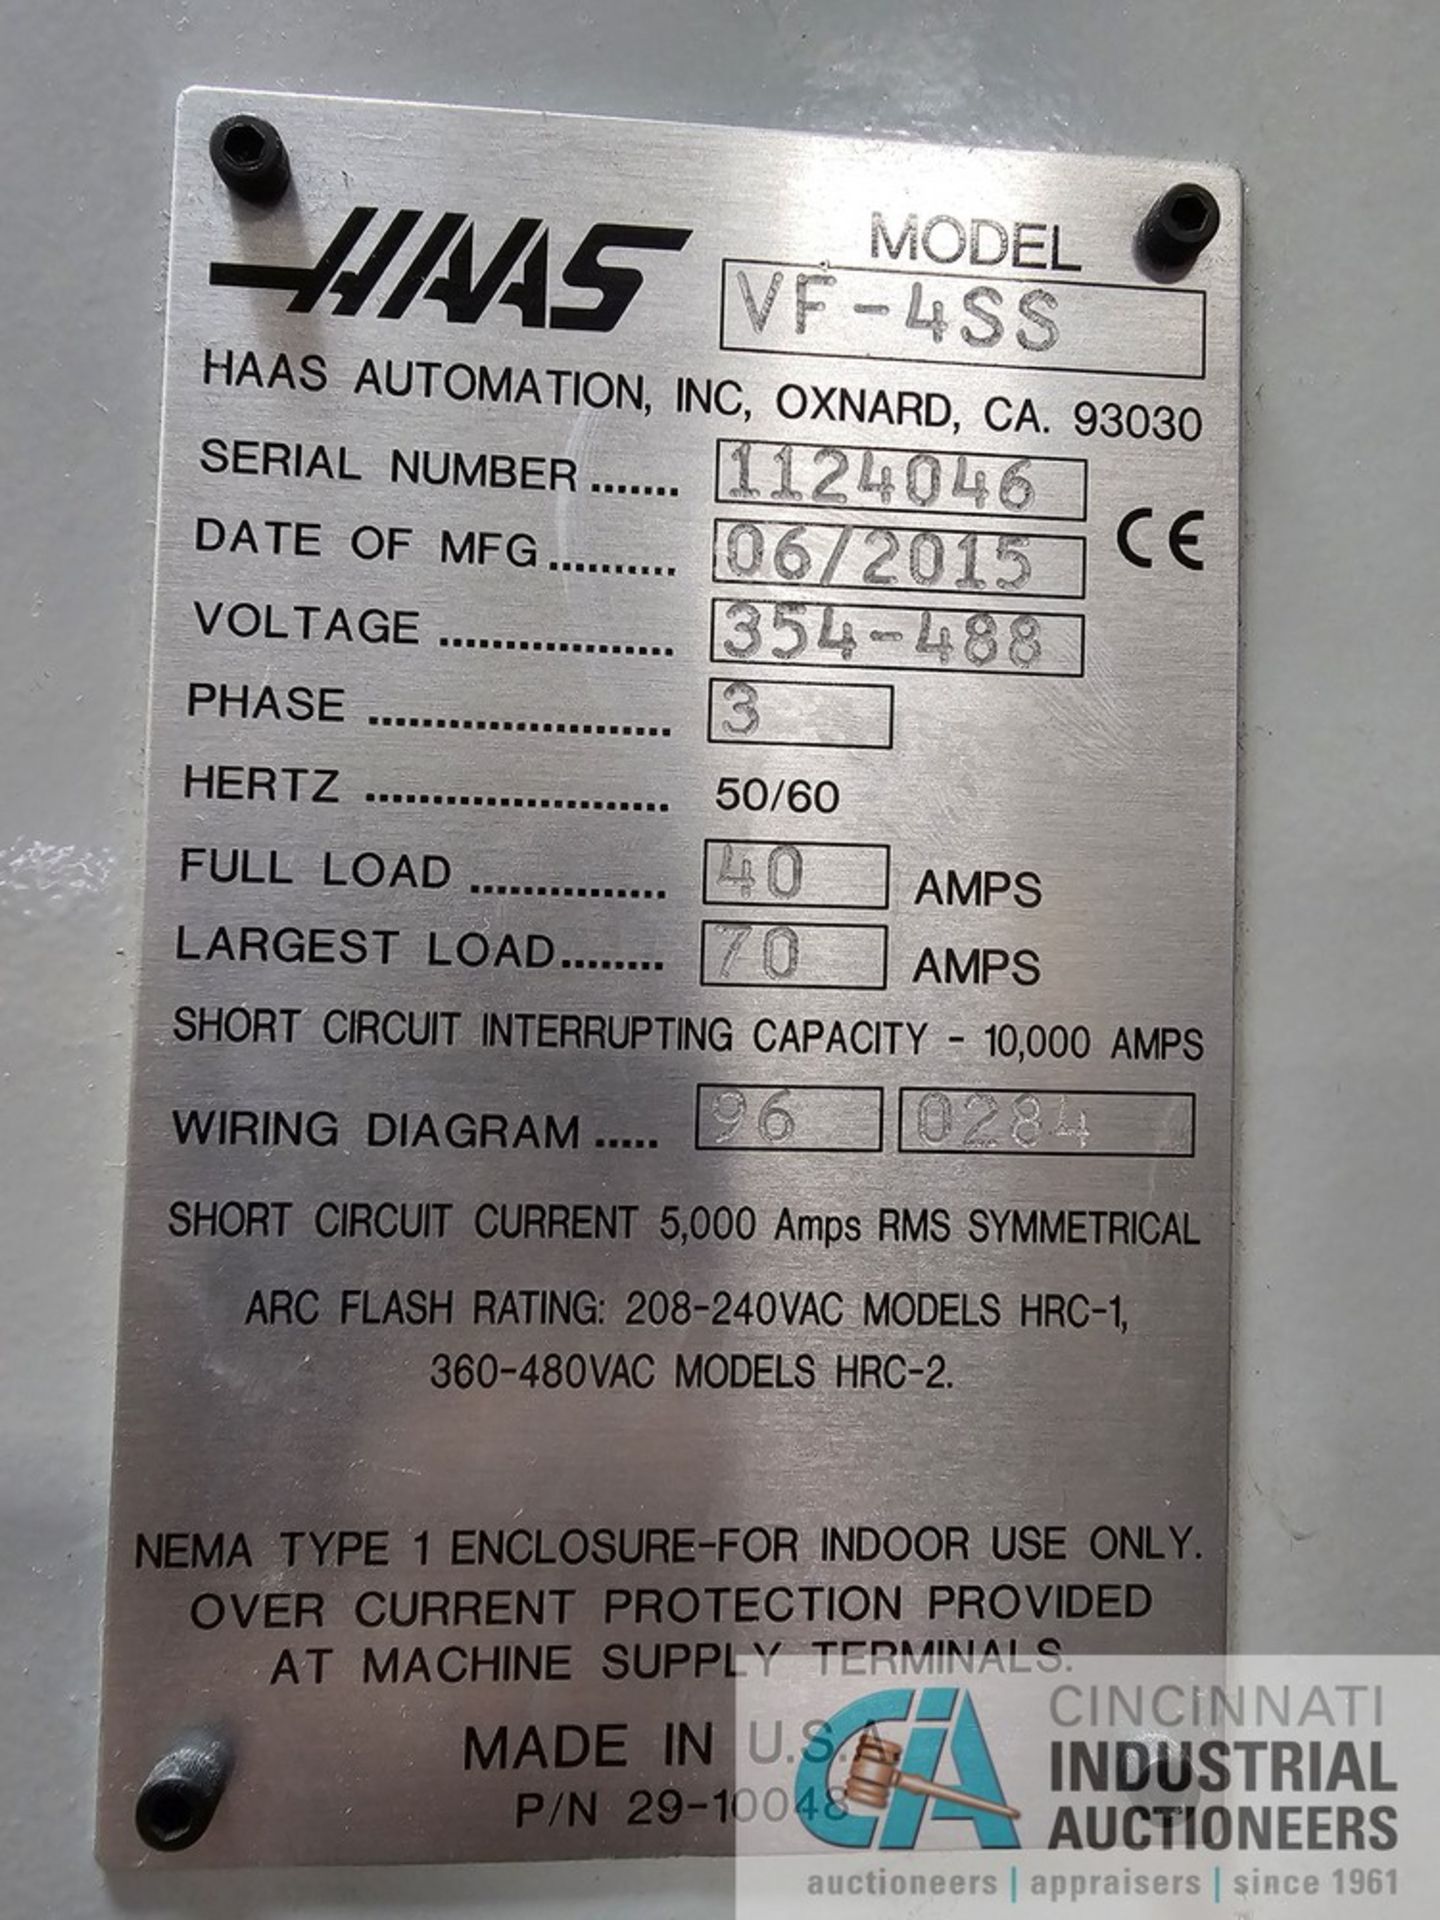 HAAS MODEL VF4SS CNC VERTICAL MACHINING CENTER; S/N 1224046, 20" X 52" TABLE, 40 TAPER SPINDLE, 12, - Image 8 of 14